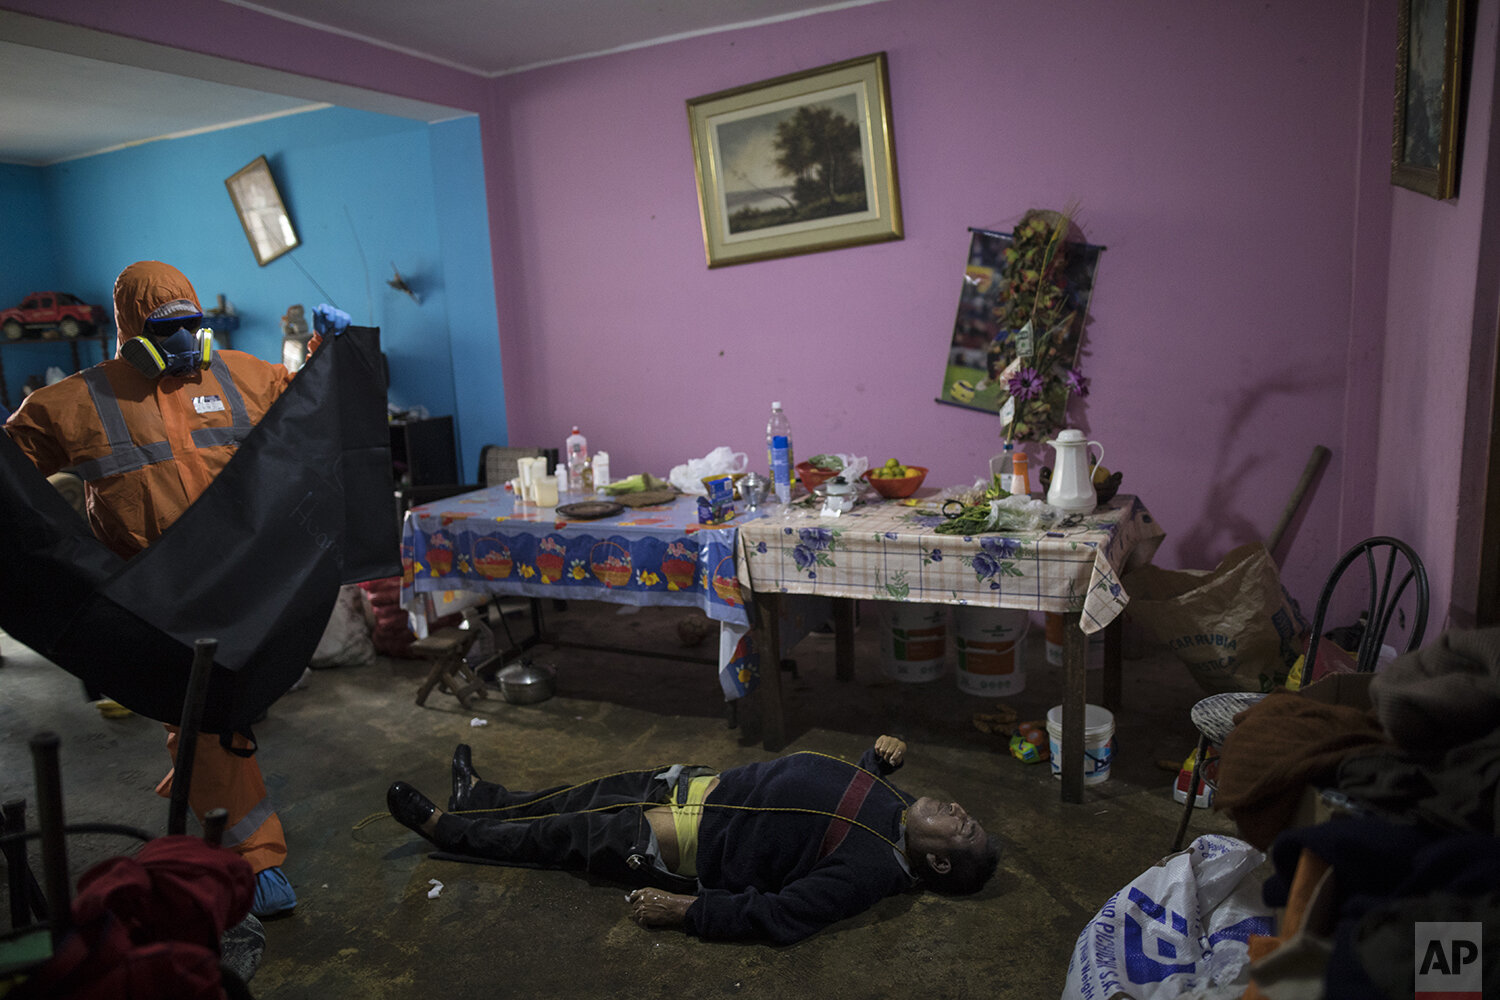  In this photo from May 5, 2020, Luis Zerpa, 21, prepares to collect the corpse of Faustino Lopez, 68, who committed suicide inside his home in Lima, Peru. Faustino Lopez's son, Jorge Lopez, told The Associated Press that his father committed suicide